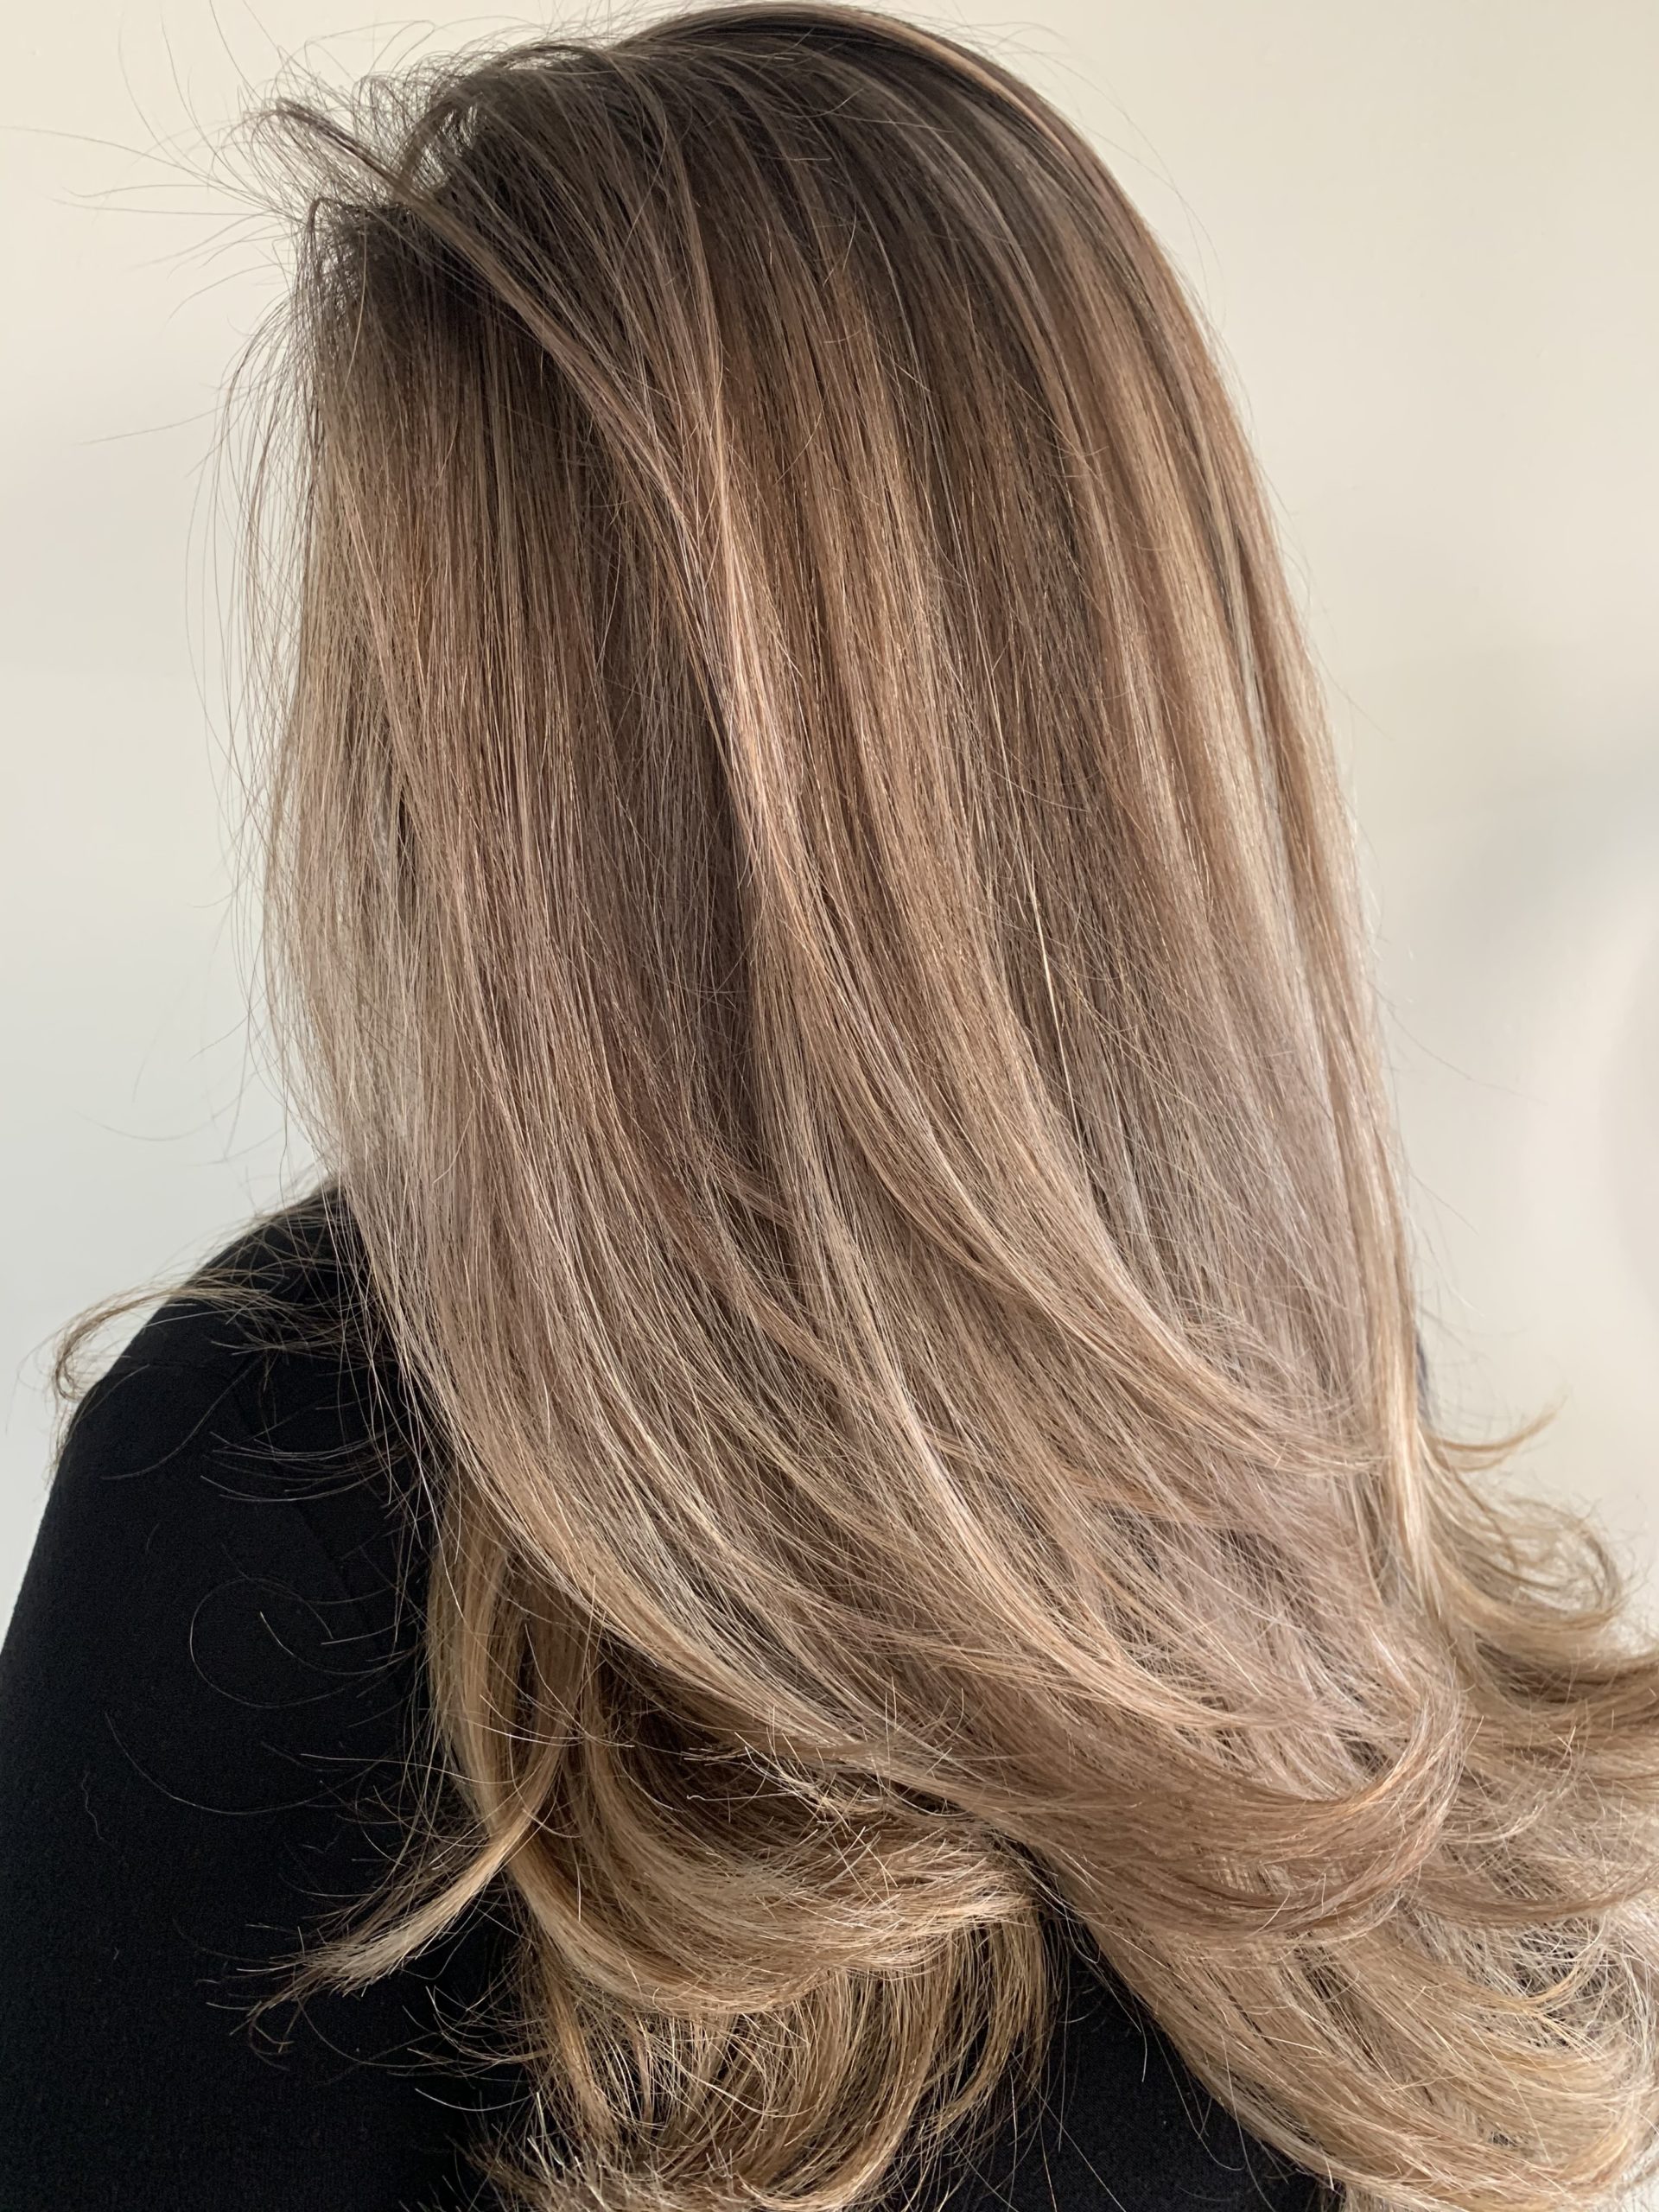 Long hair that is darker at the roots and gradually transitions to blonde. Everything is well blended.